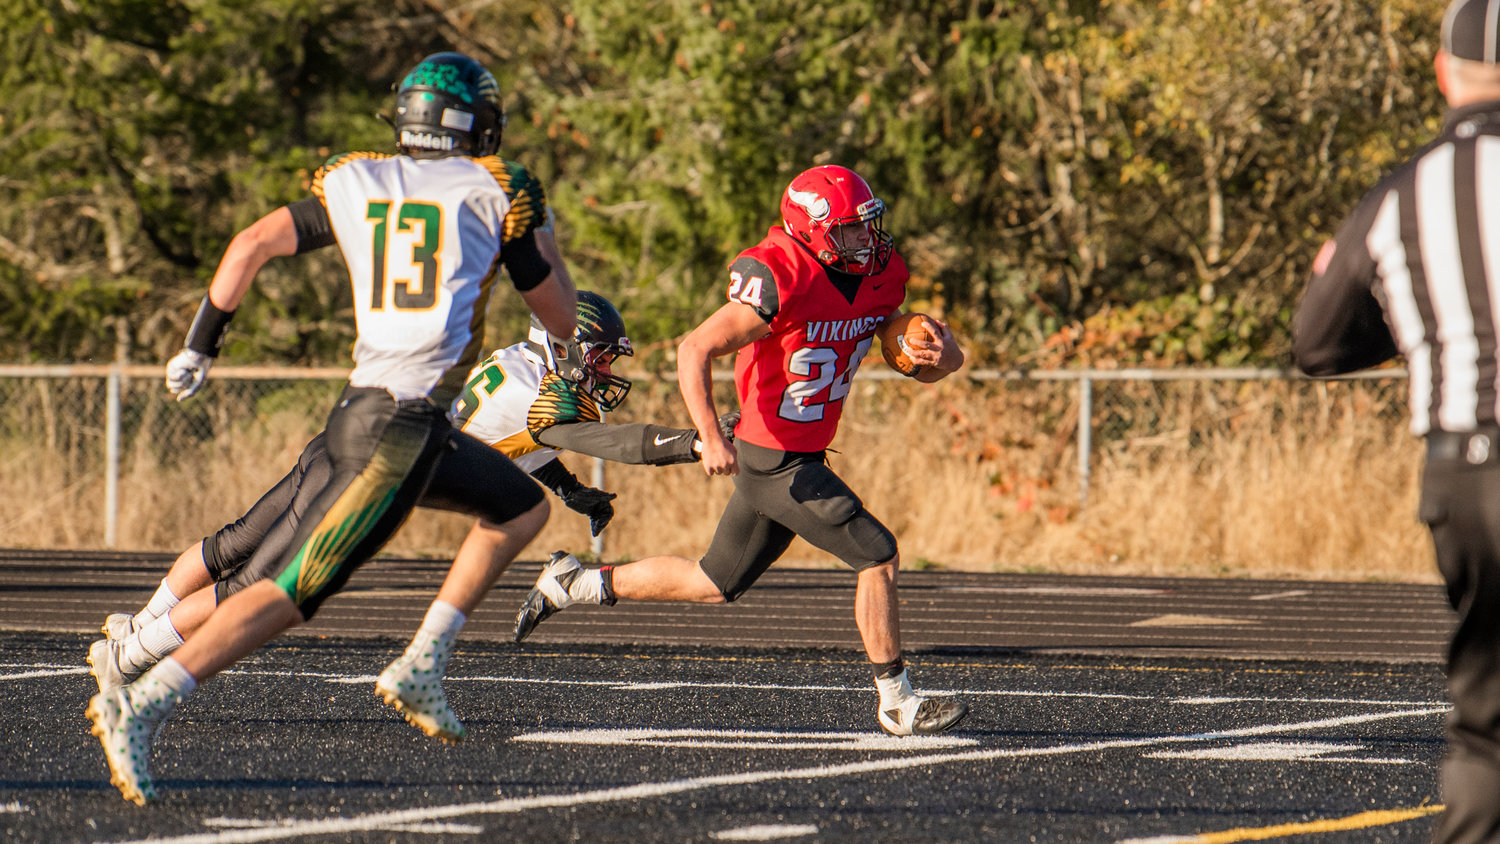 Mossyrock senior Sage Greisen (24) runs past Liberty Bell defenders to score during a Saturday afternoon game in Tenino.